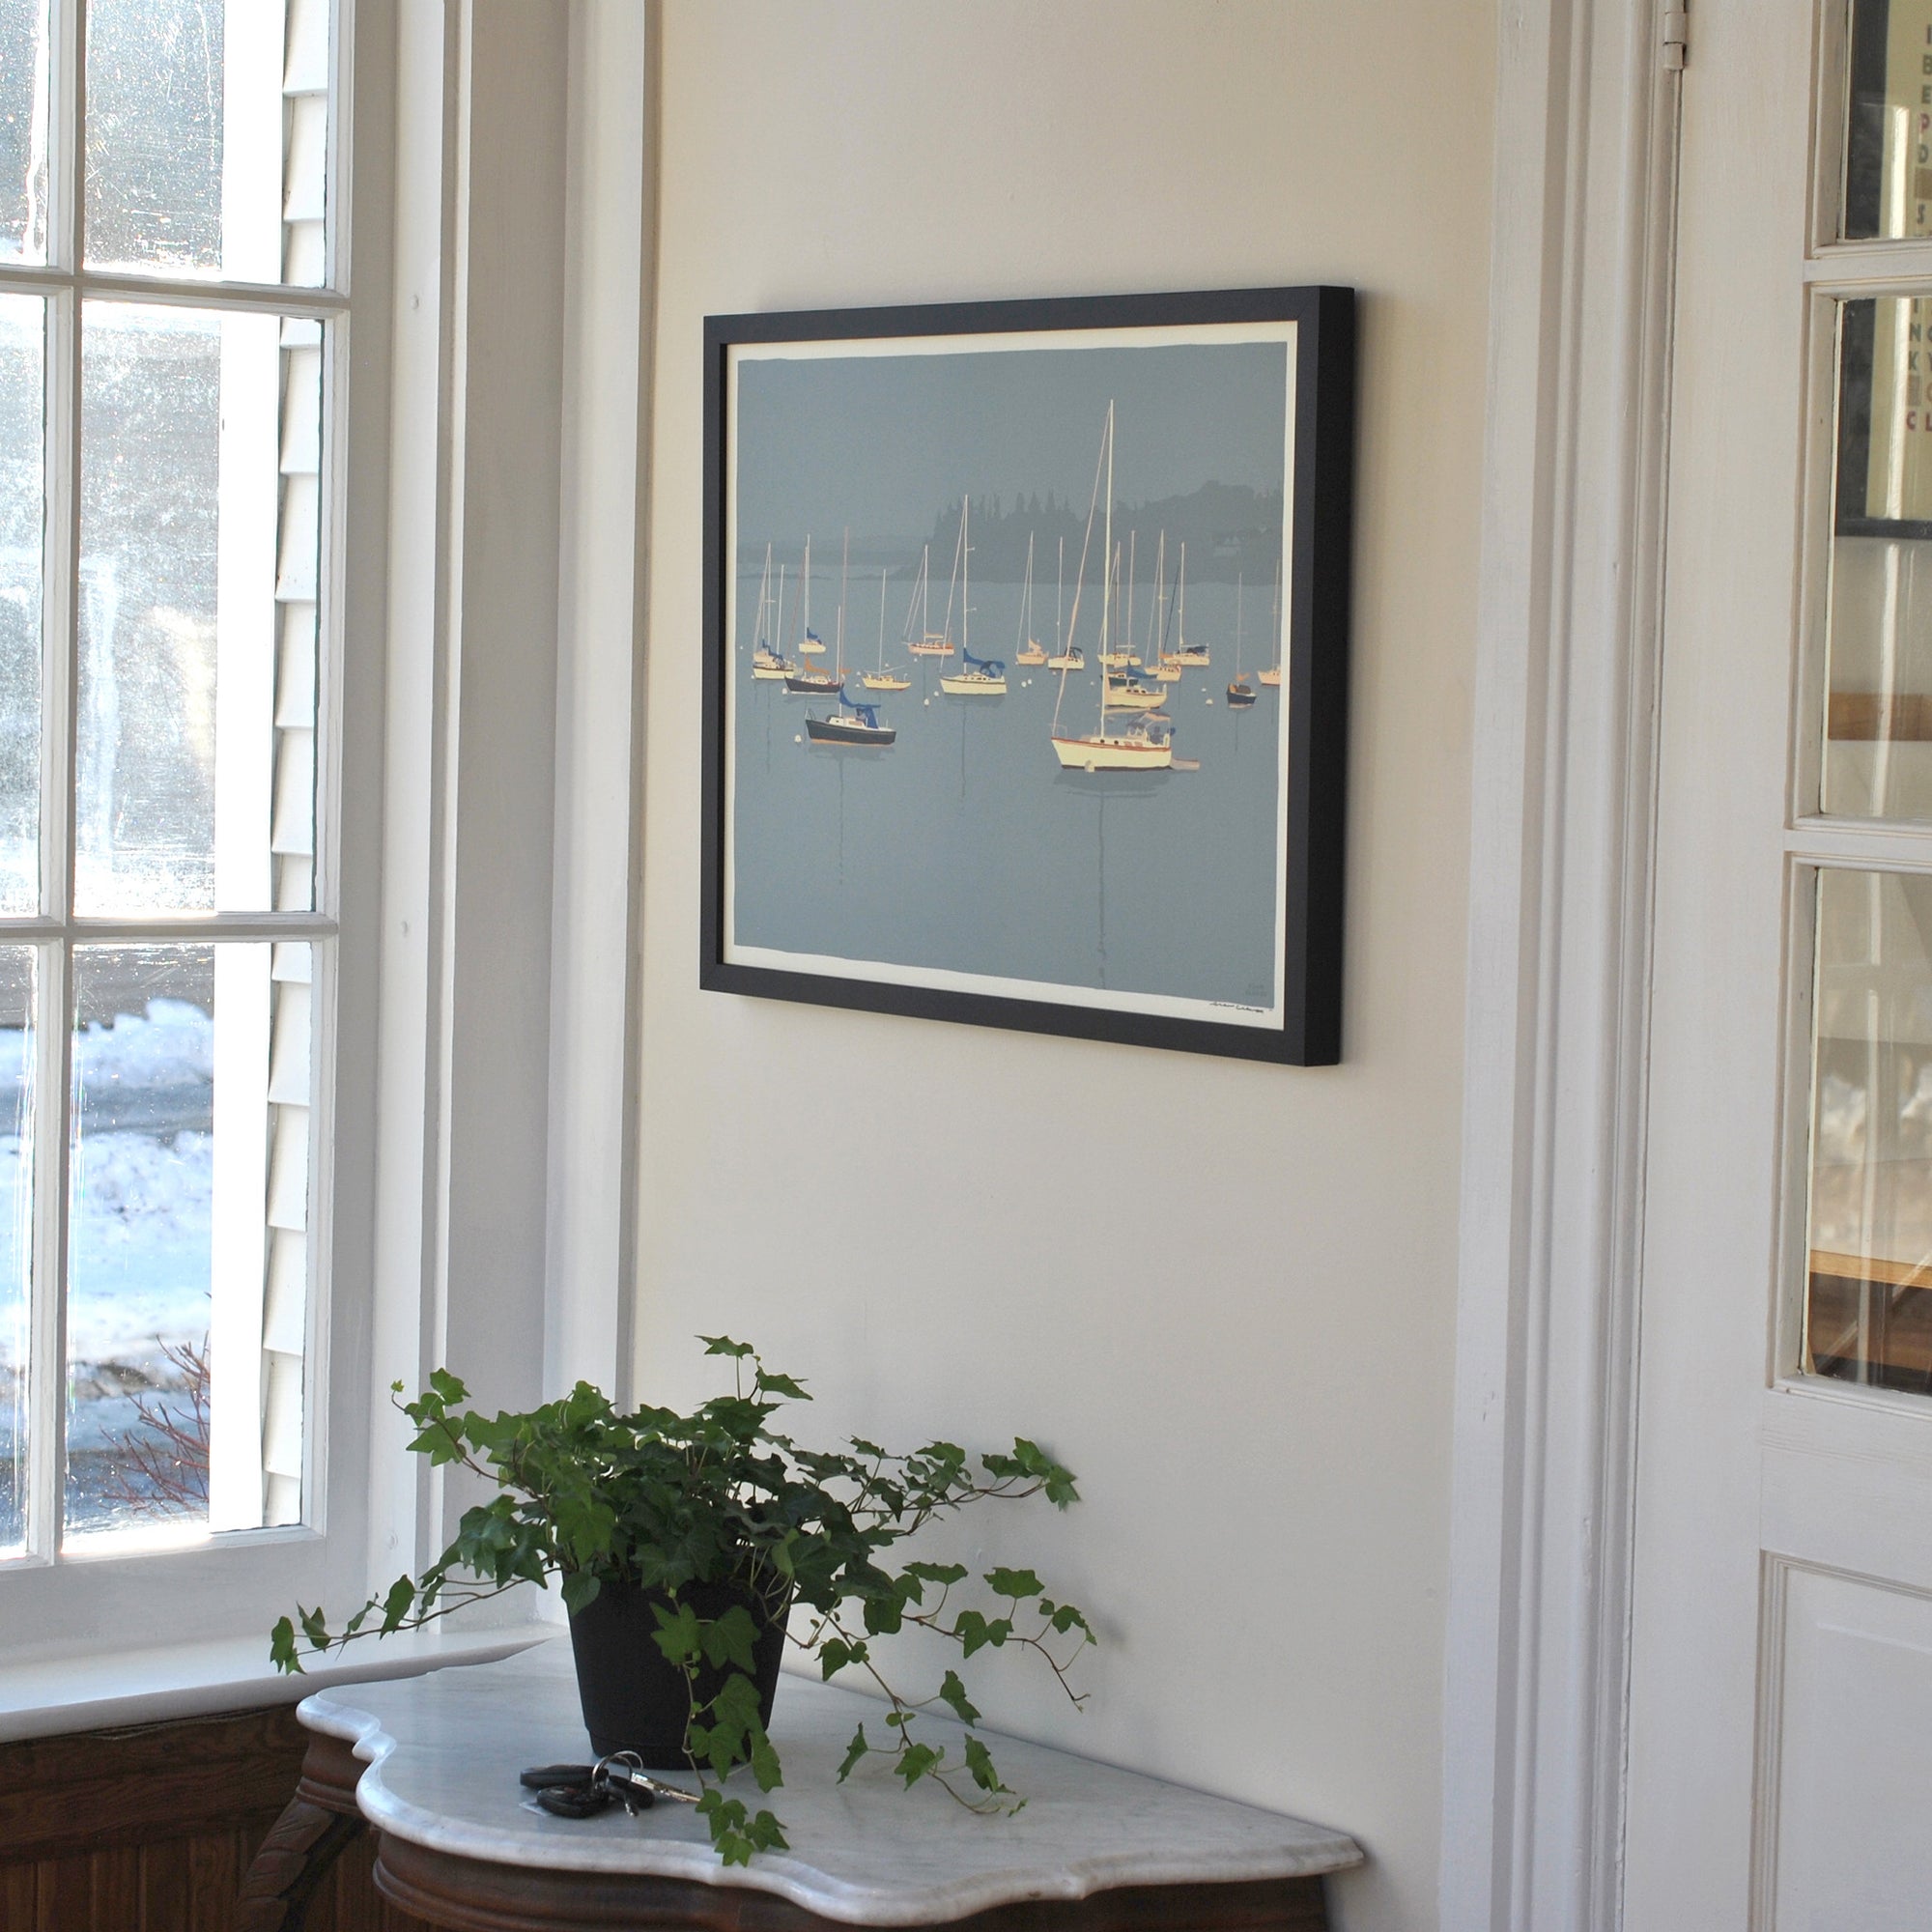 Sailboats in Rockland Harbor Art Print 18" x 24" Horizontal Framed Wall Poster By Alan Claude - Maine